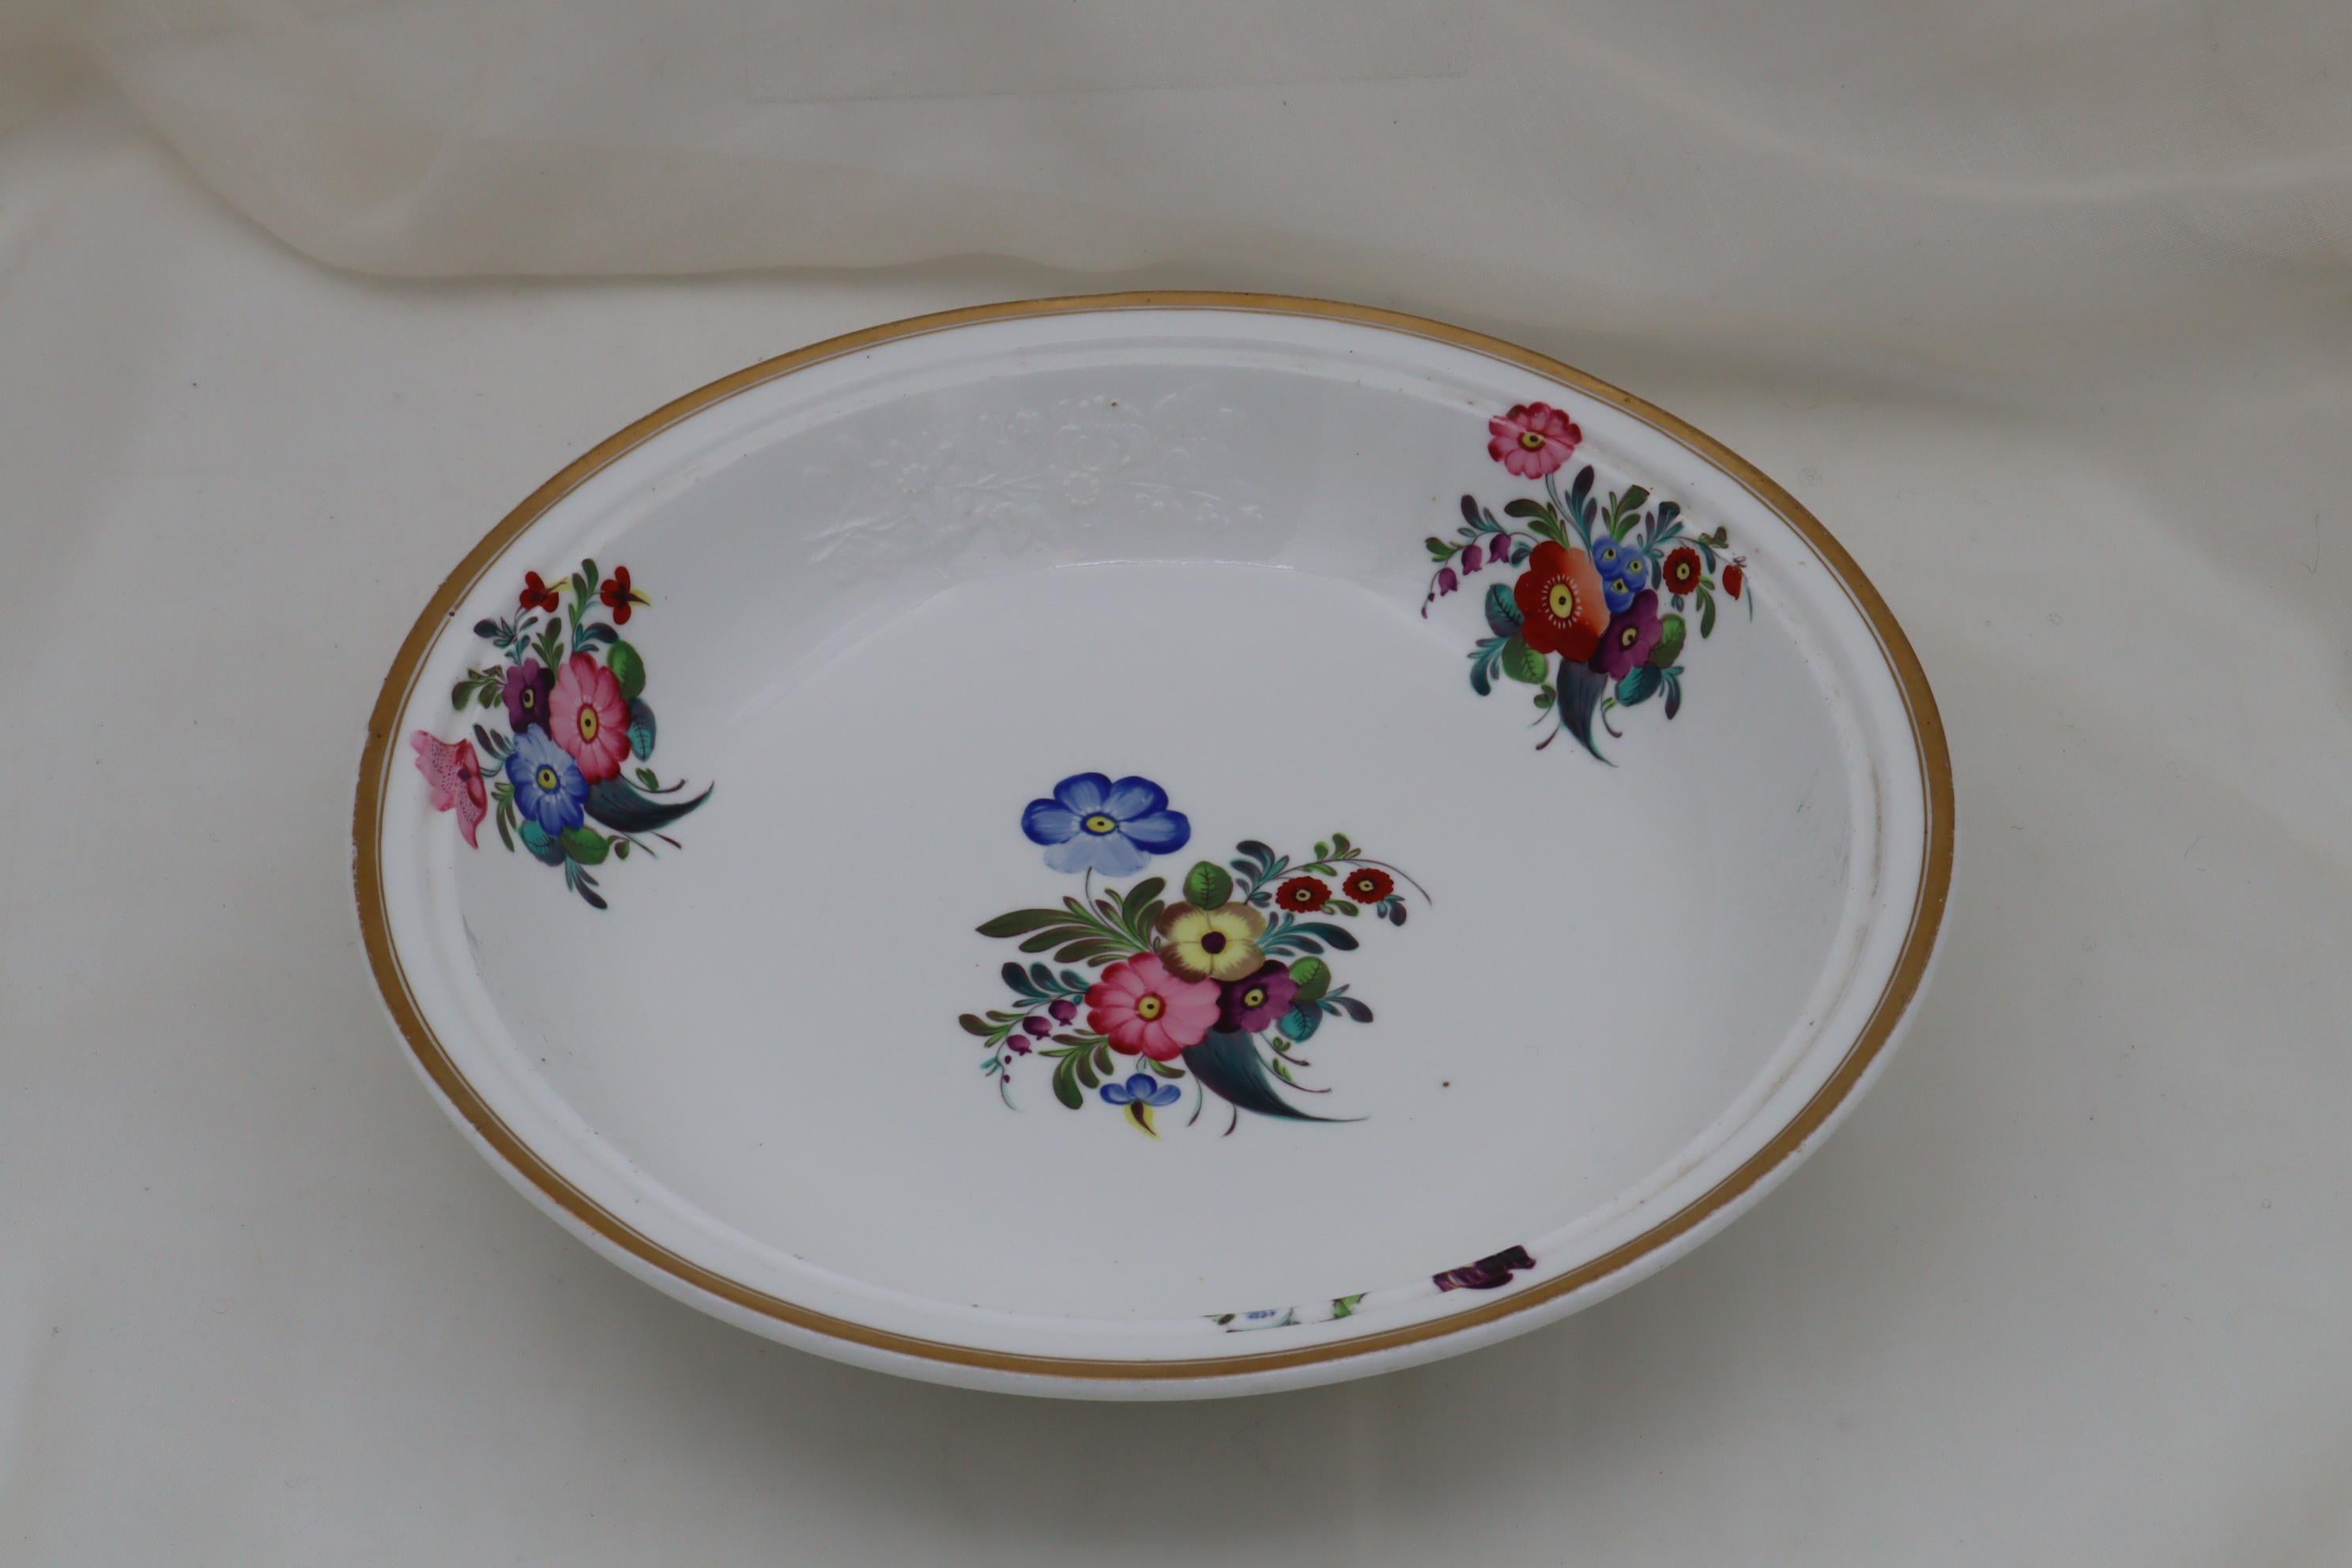 This Spode hand painted and gilded vegetable tureen is decorated around the rim of both the body and the lid, with three moulded sprays of flowers left in the white, and between them are a further three hand painted sprays. There is also a larger